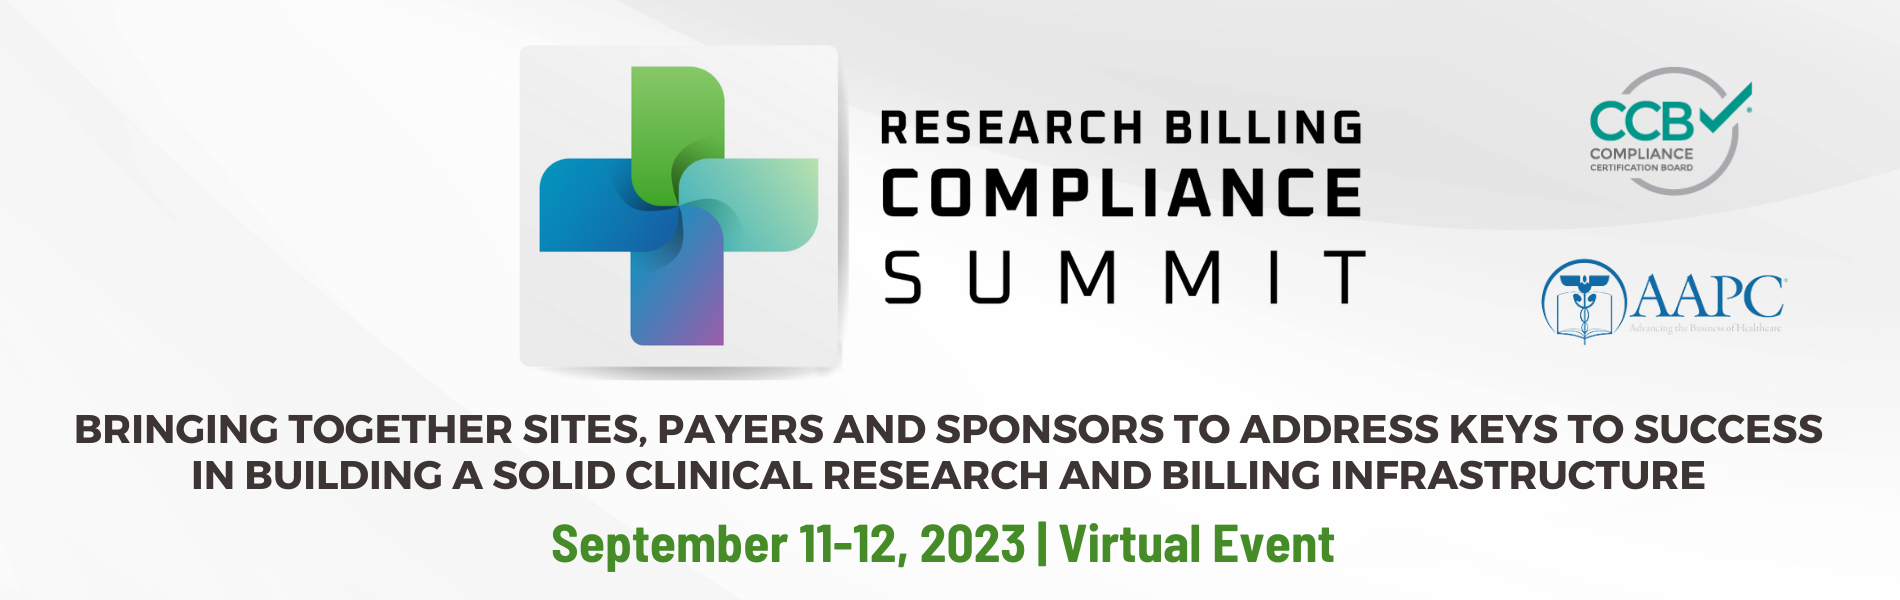 Banner of Research Billing Compliance Summit Virtual Event, Bringing Together sites, payers and sponsors to address keys to success in building a solid clinical research and billing infrastructure, September 11-12, 2023, Virtual Event